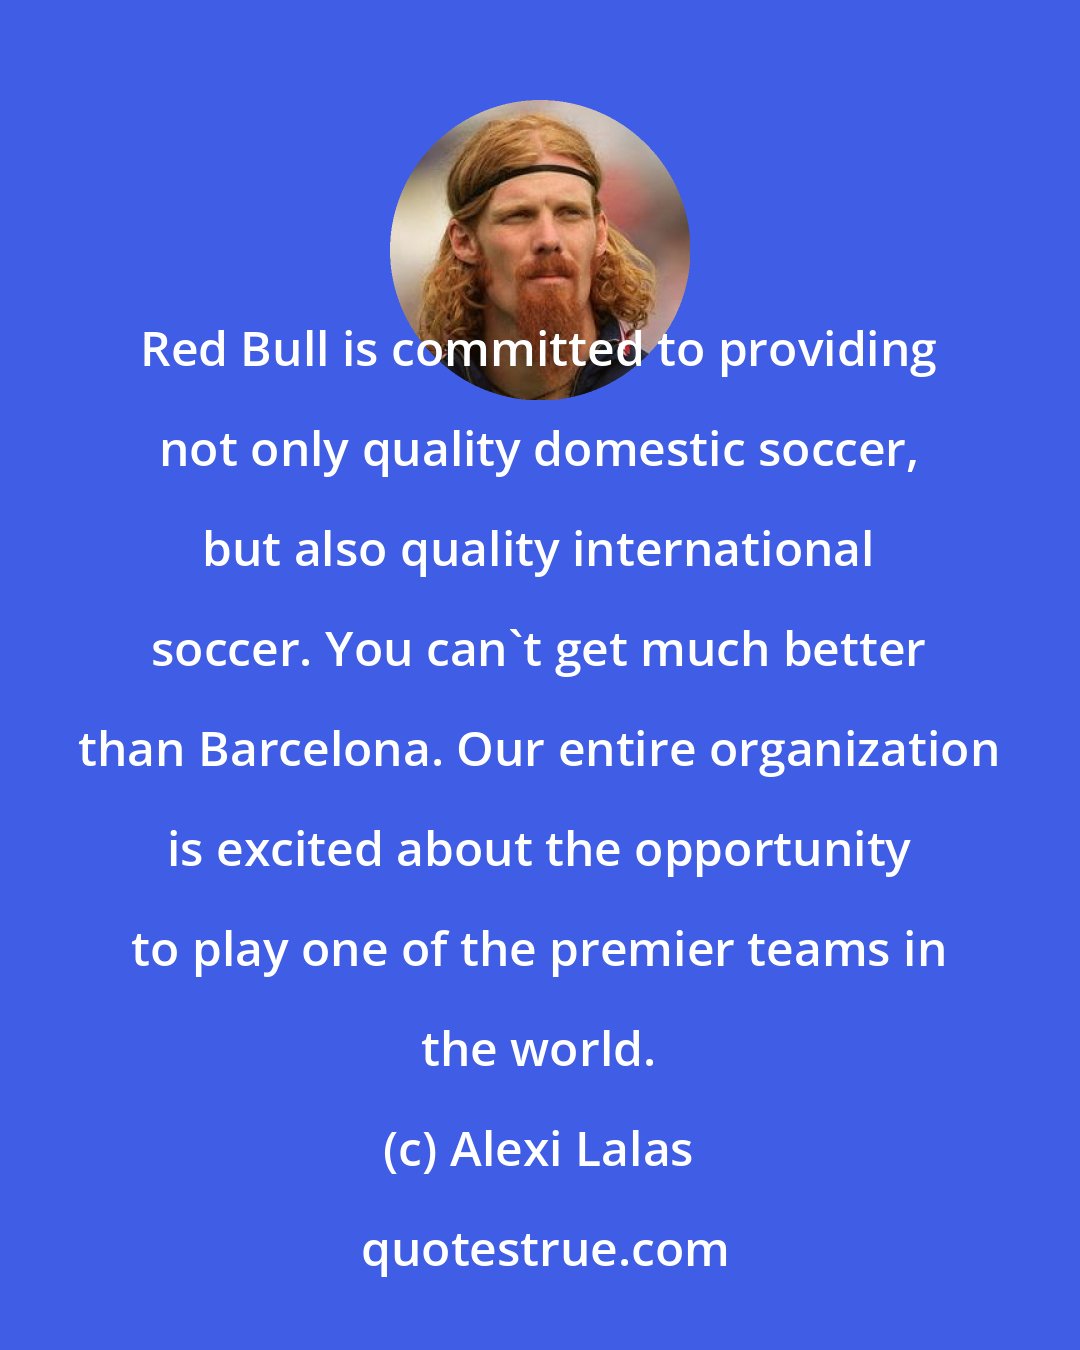 Alexi Lalas: Red Bull is committed to providing not only quality domestic soccer, but also quality international soccer. You can't get much better than Barcelona. Our entire organization is excited about the opportunity to play one of the premier teams in the world.